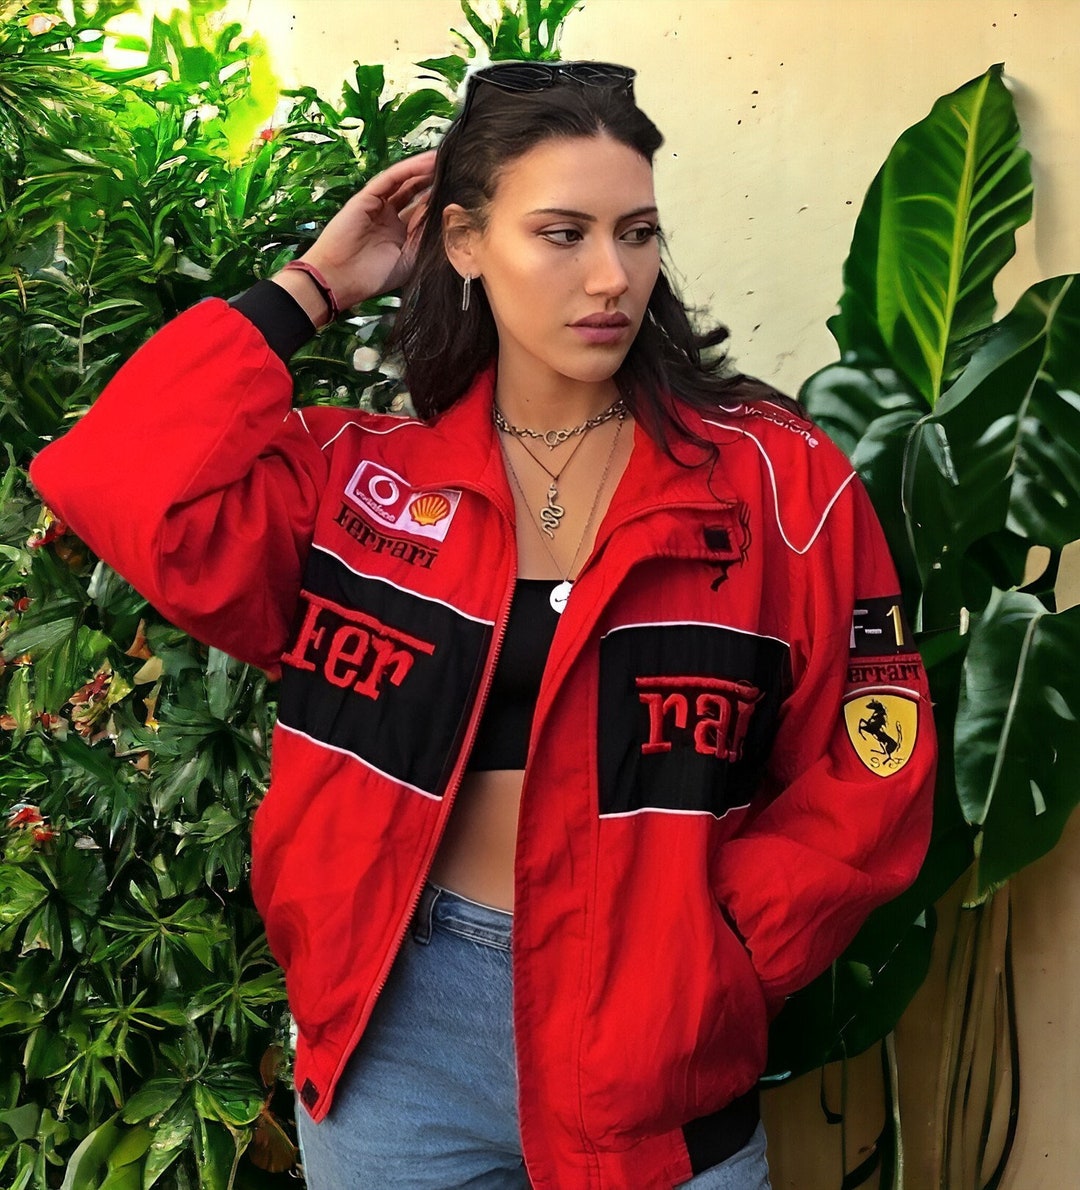 Red Ferrari F1 Jacket, Embroidered Racing Jacket - Formula 1 Vintage Jacket, Vintage Unisex Racing Jacket, Y2K 90s Racing Fan Gift, F1 Merch